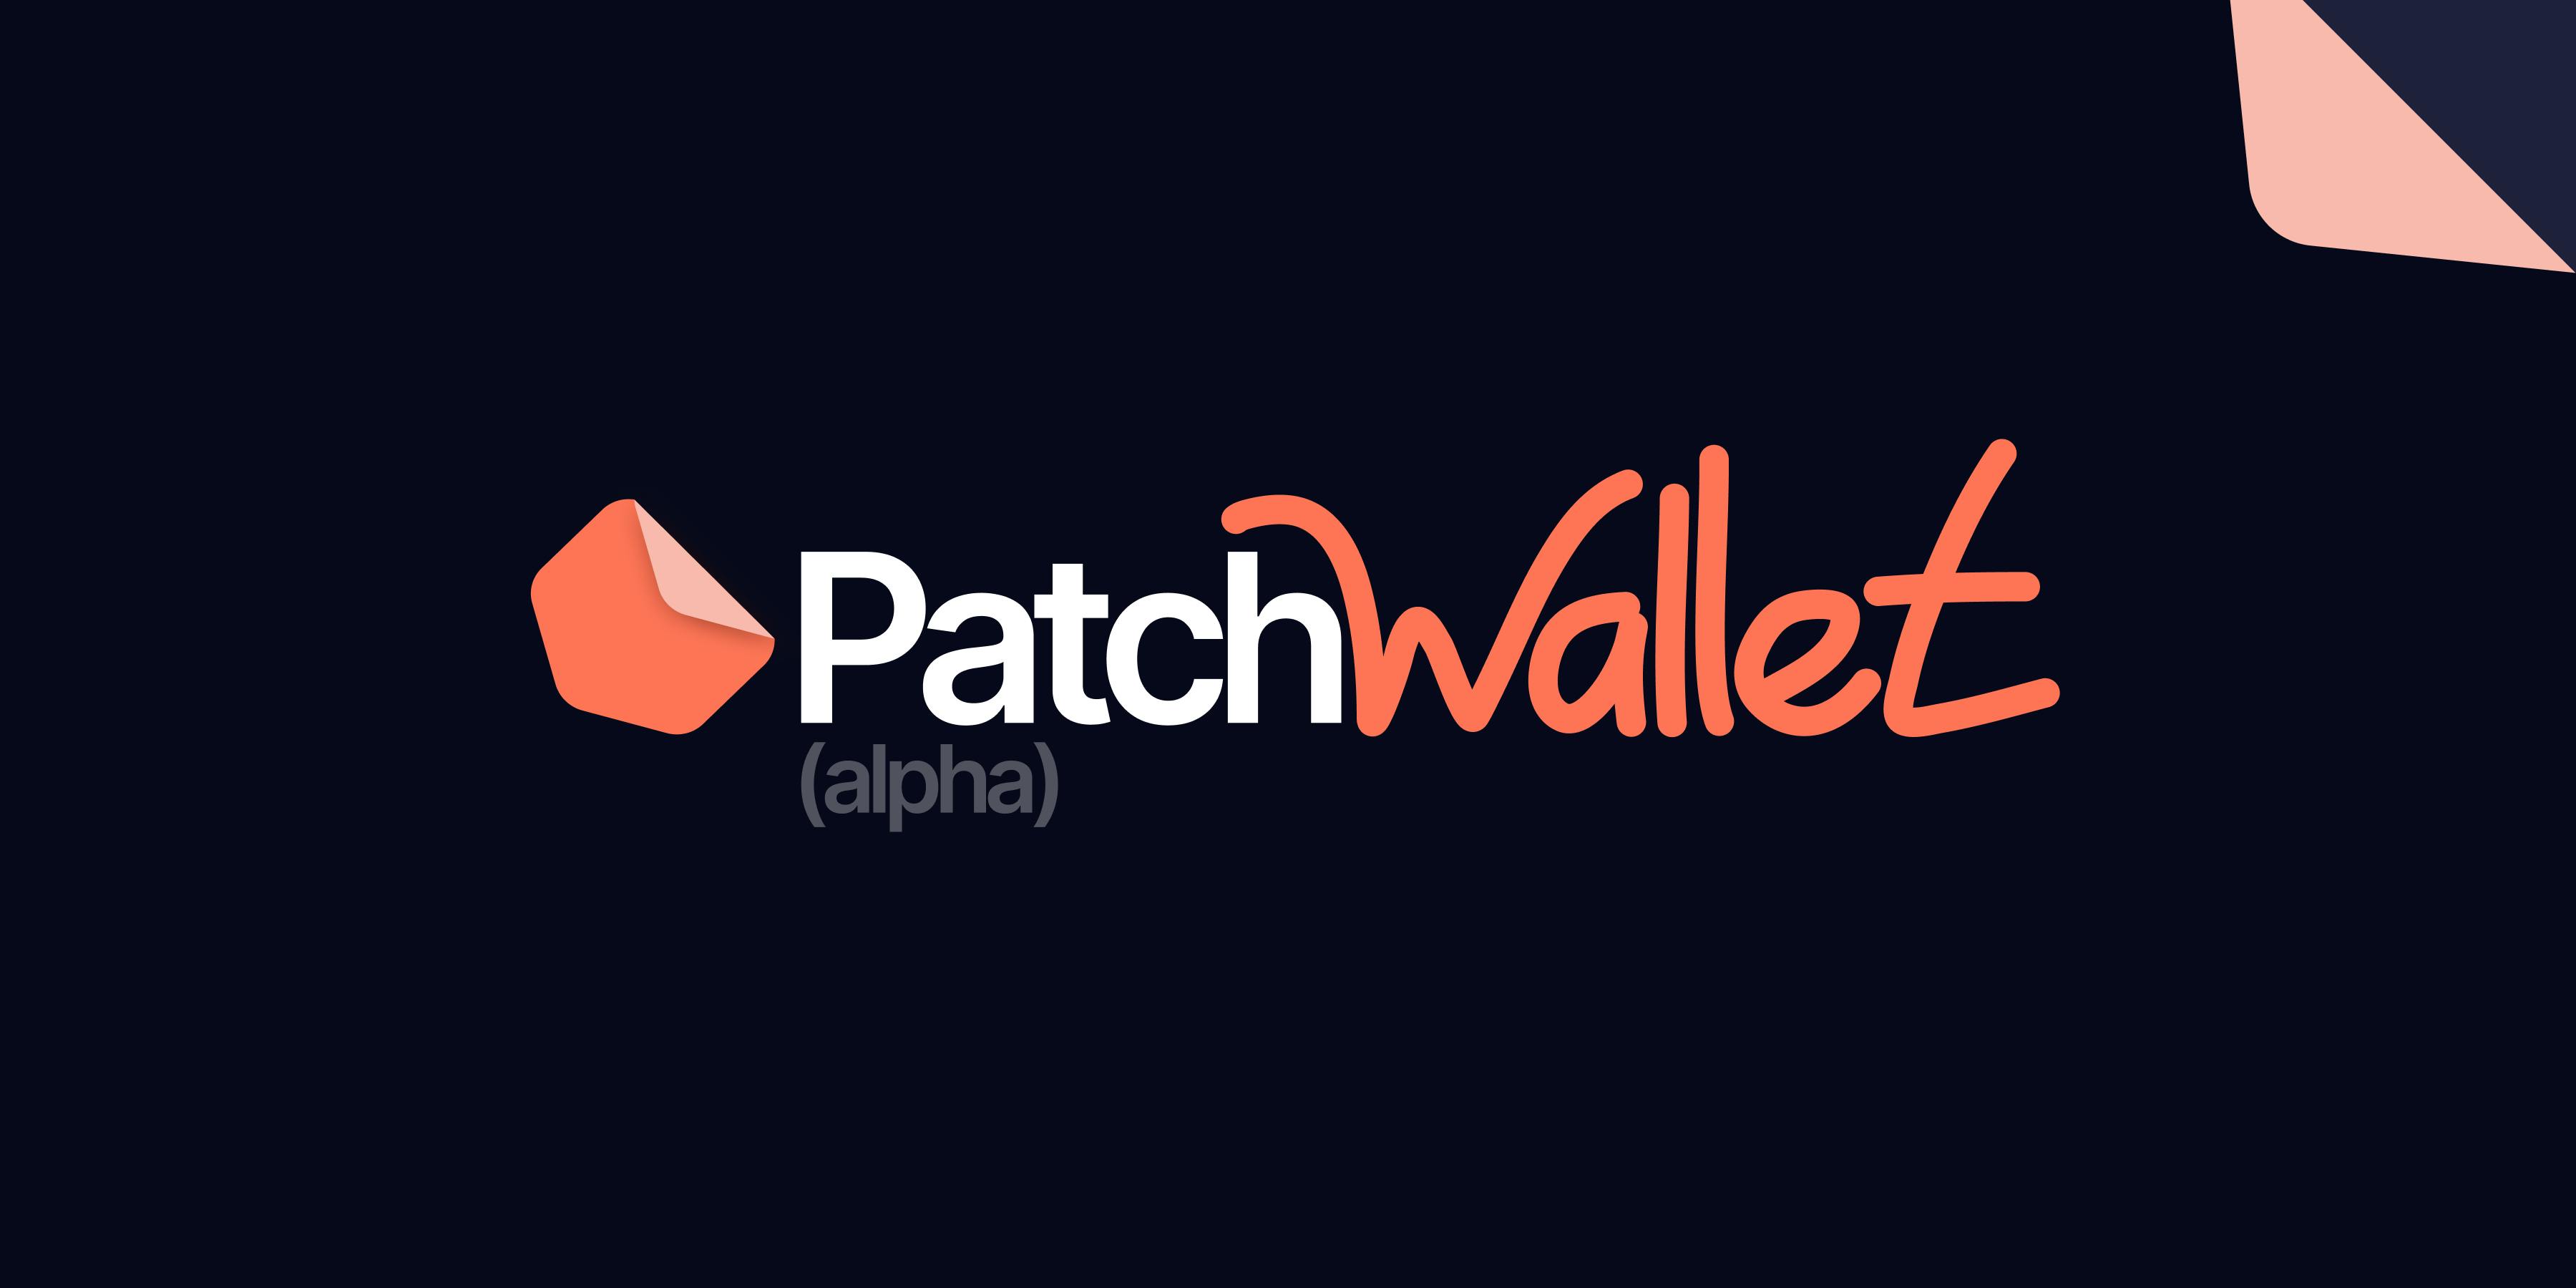 Introducing Patch Wallet